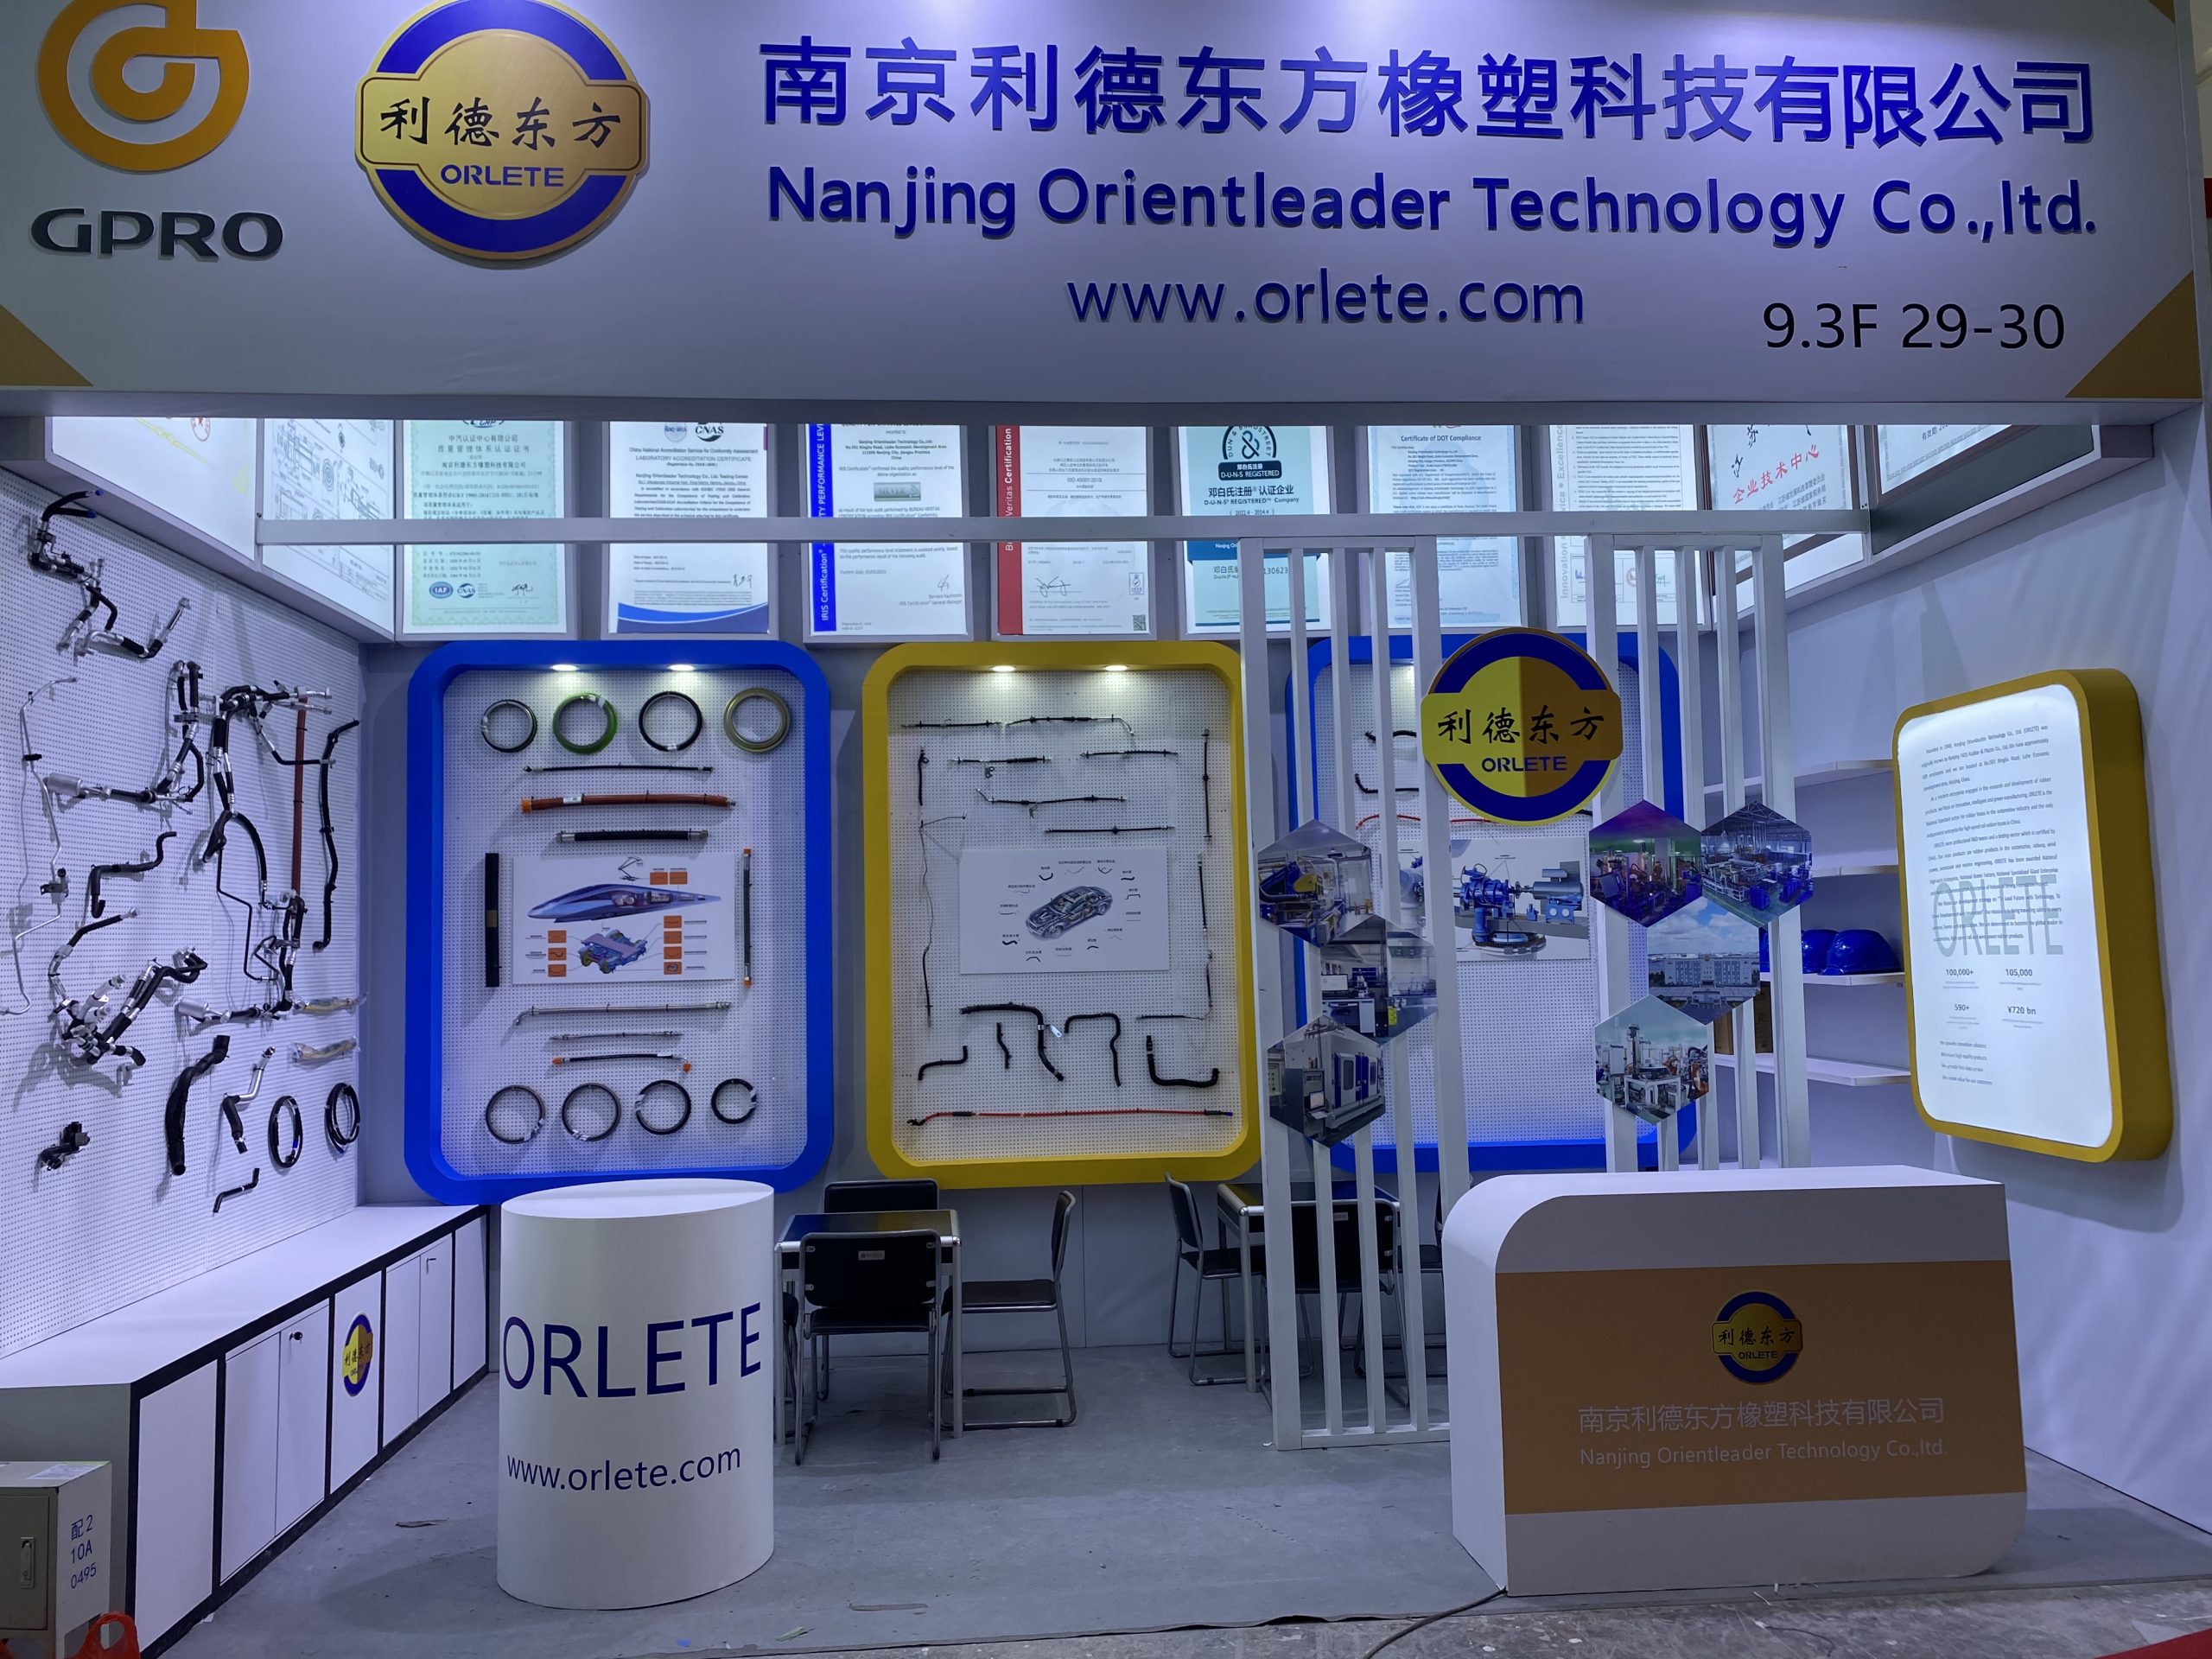 ORLETE would like to see you in the 134th canton fair